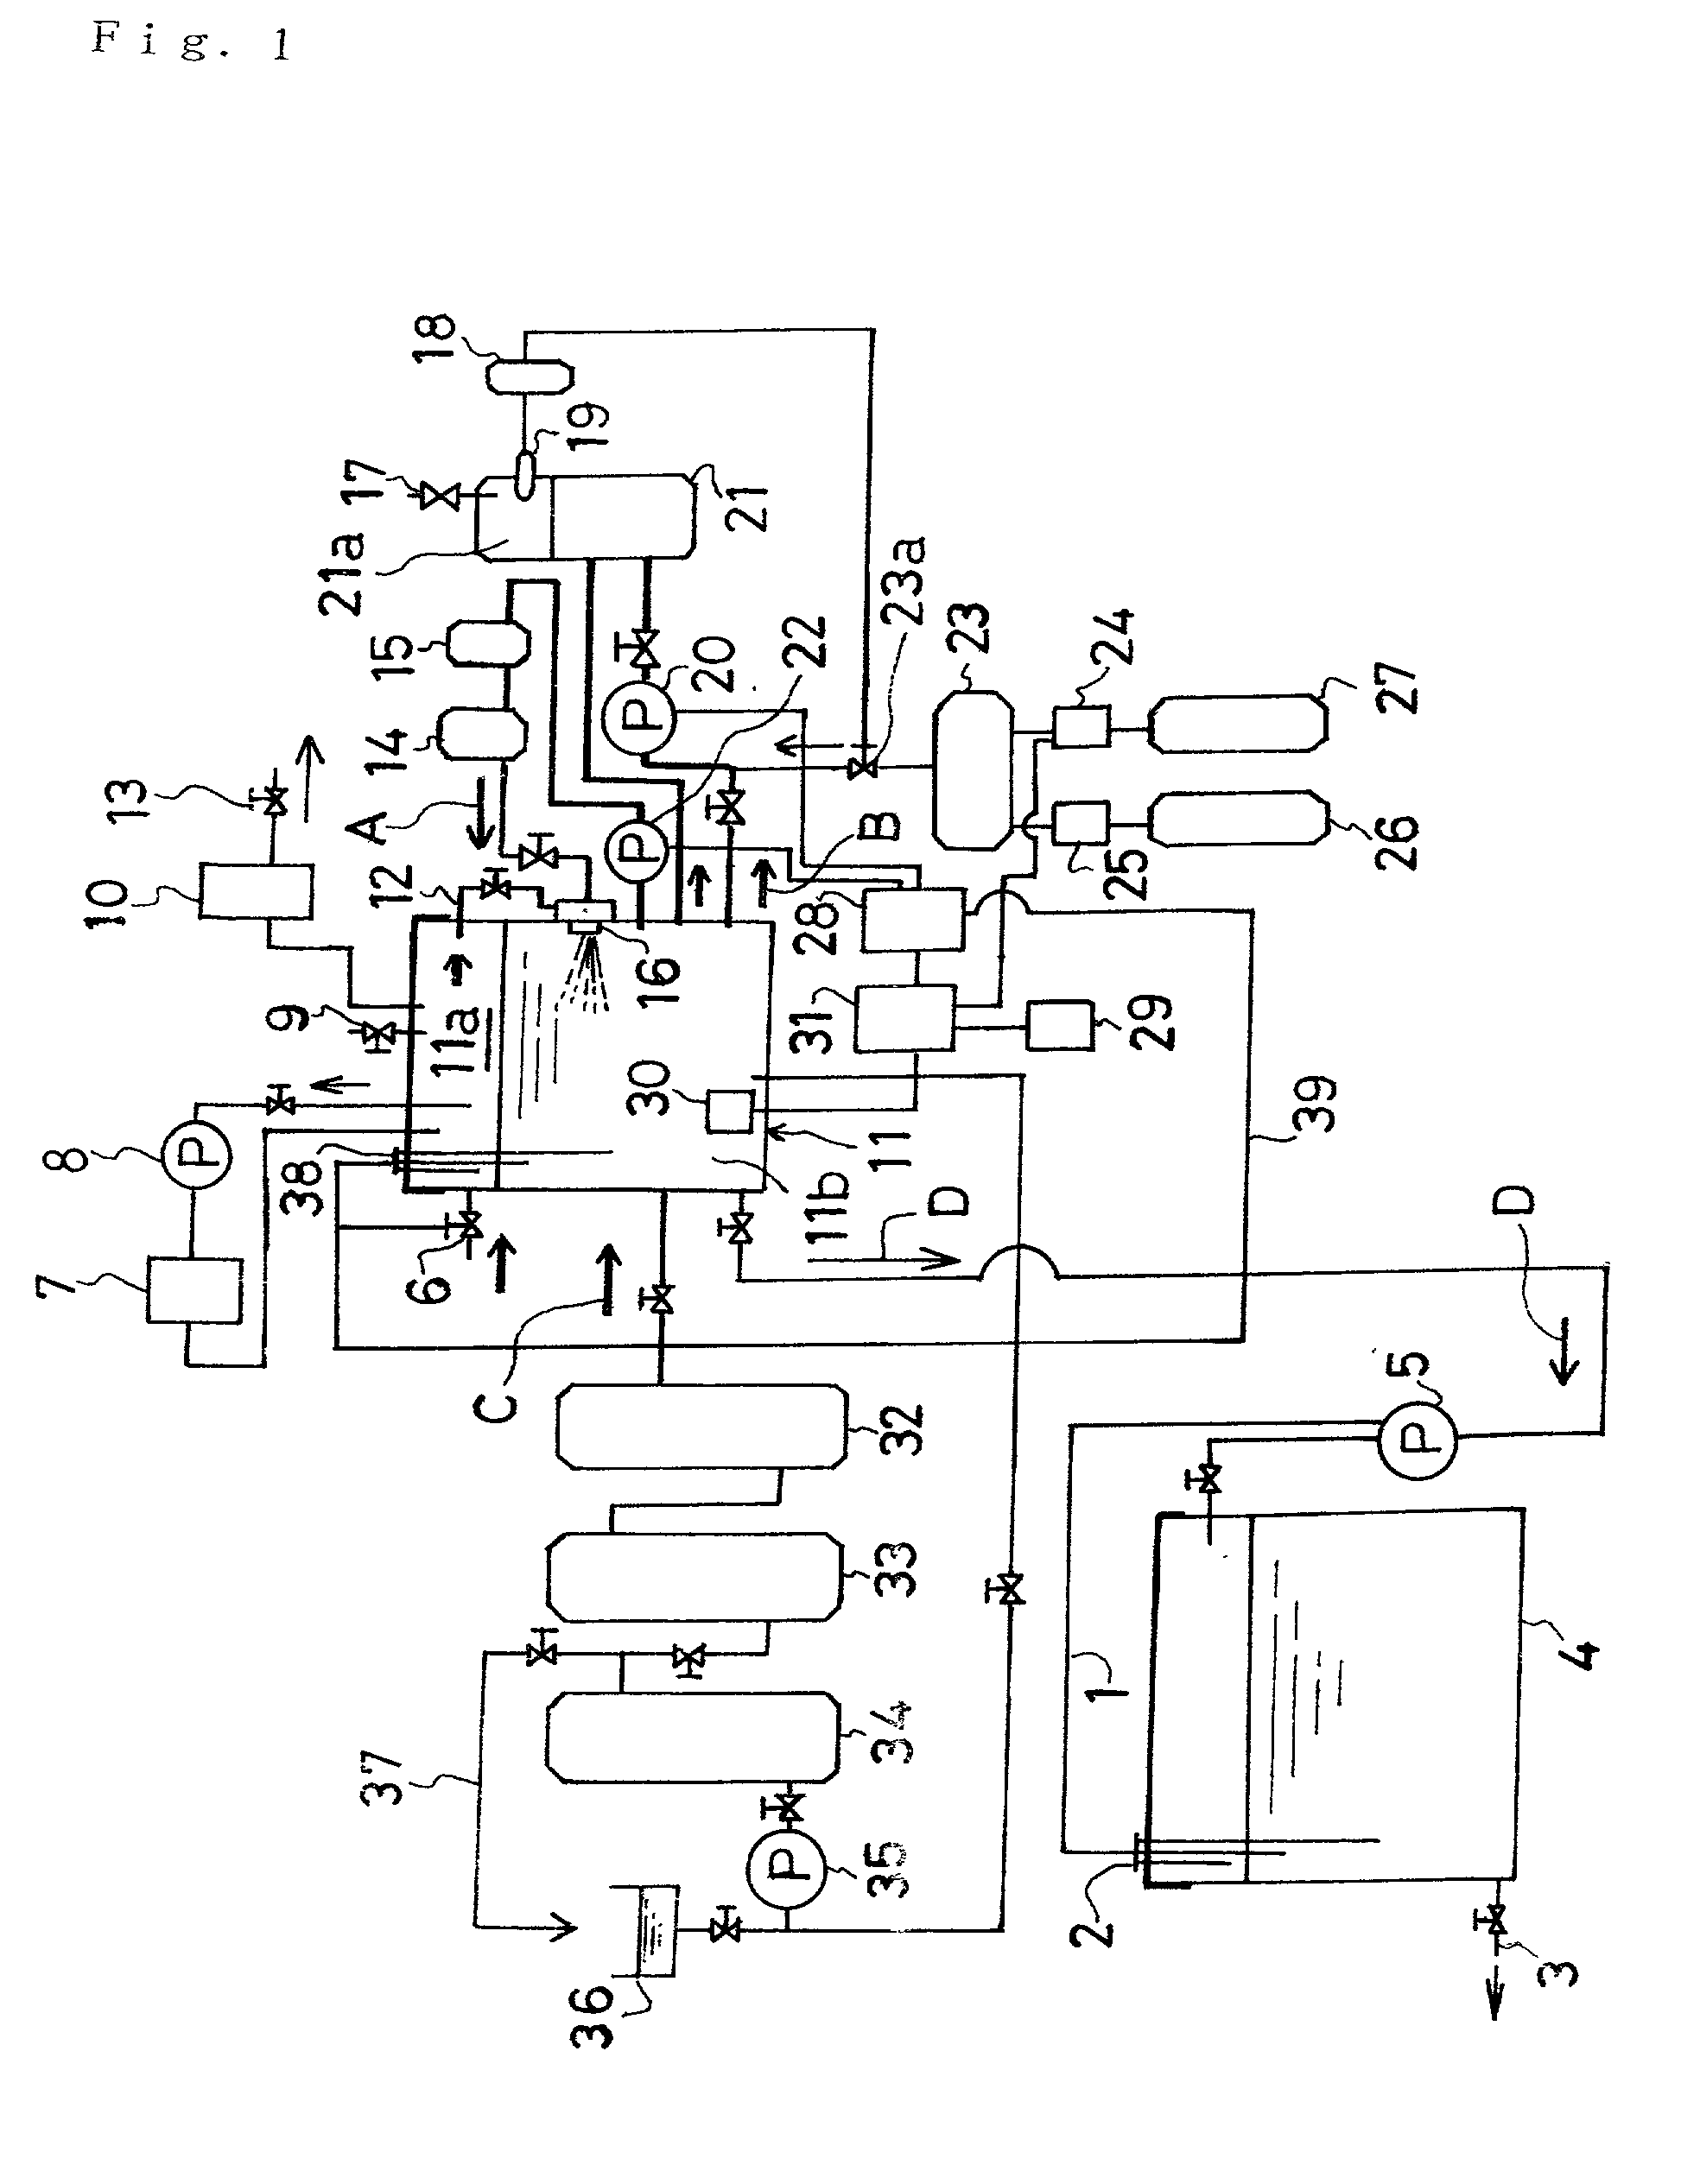 Method for automatically controlling the level of dissolved oxygen in water based on a pressure tank system equipped with sterilizer